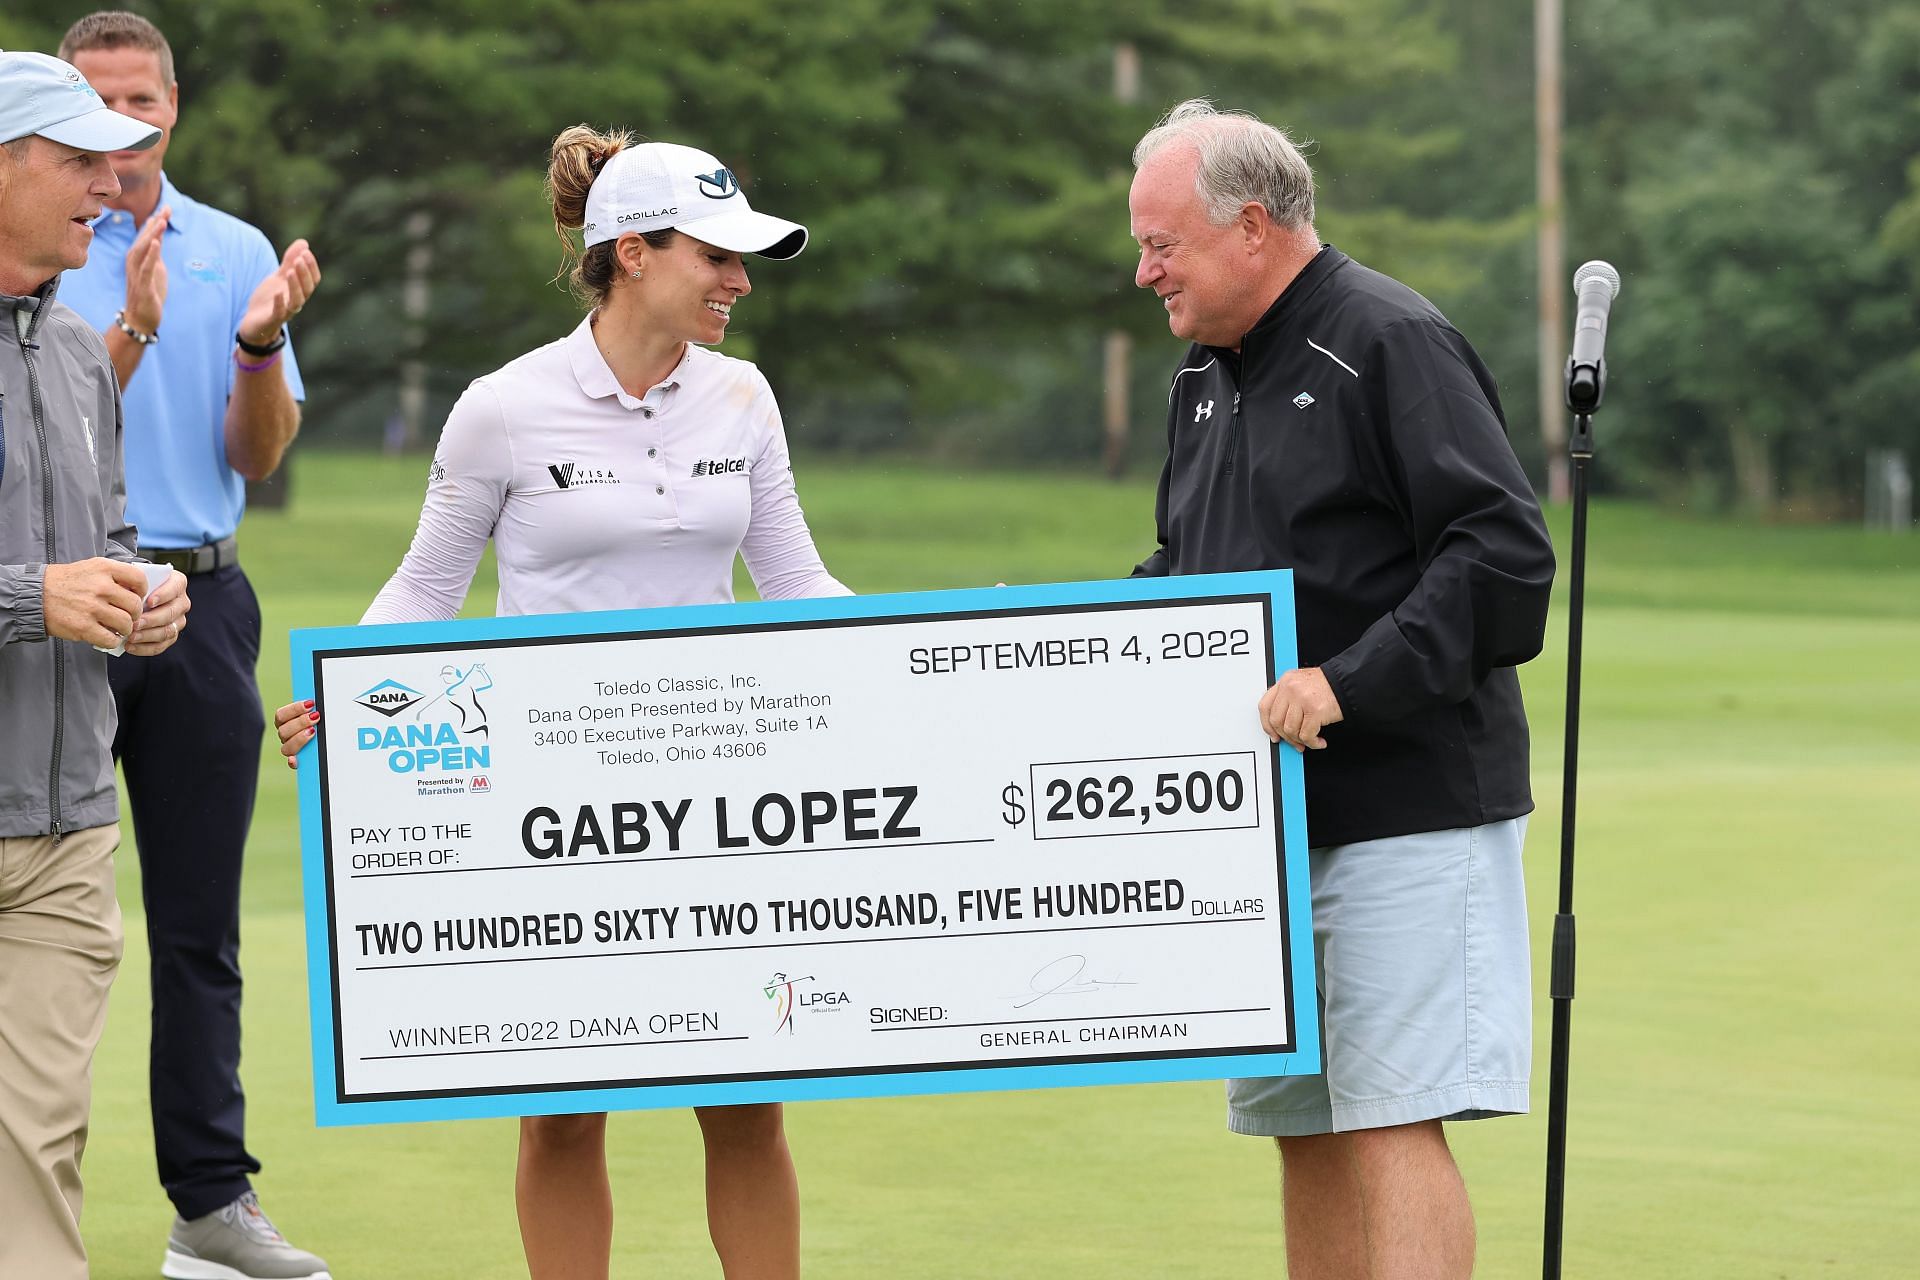 Gaby Lopez with the 2022 Dana Open paycheck (via Getty Images)